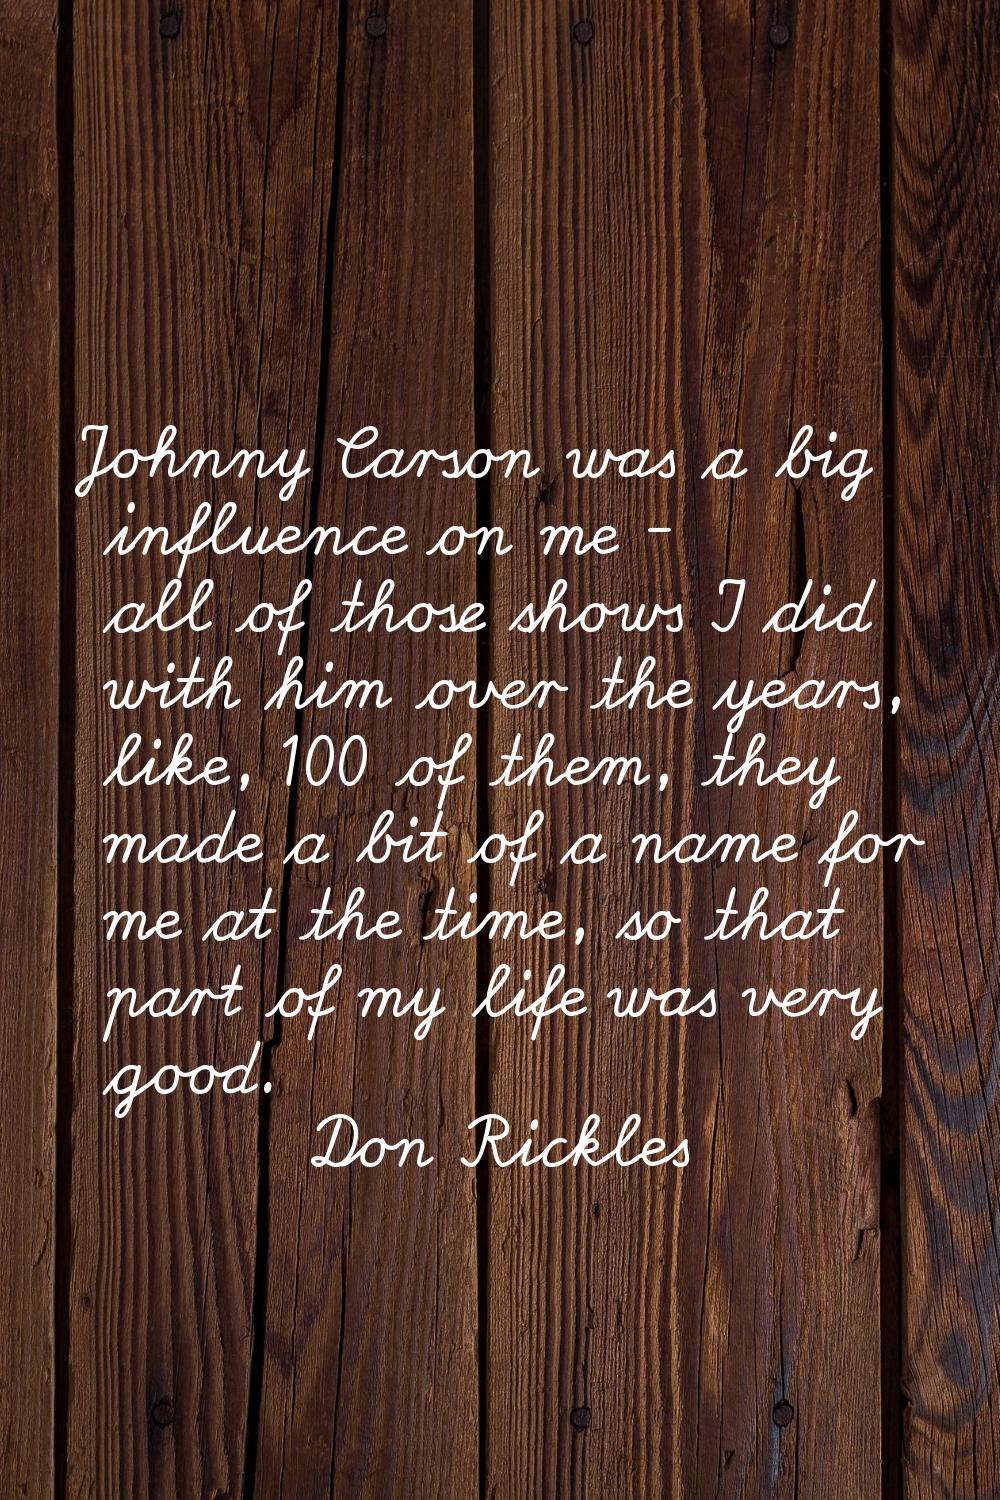 Johnny Carson was a big influence on me - all of those shows I did with him over the years, like, 1